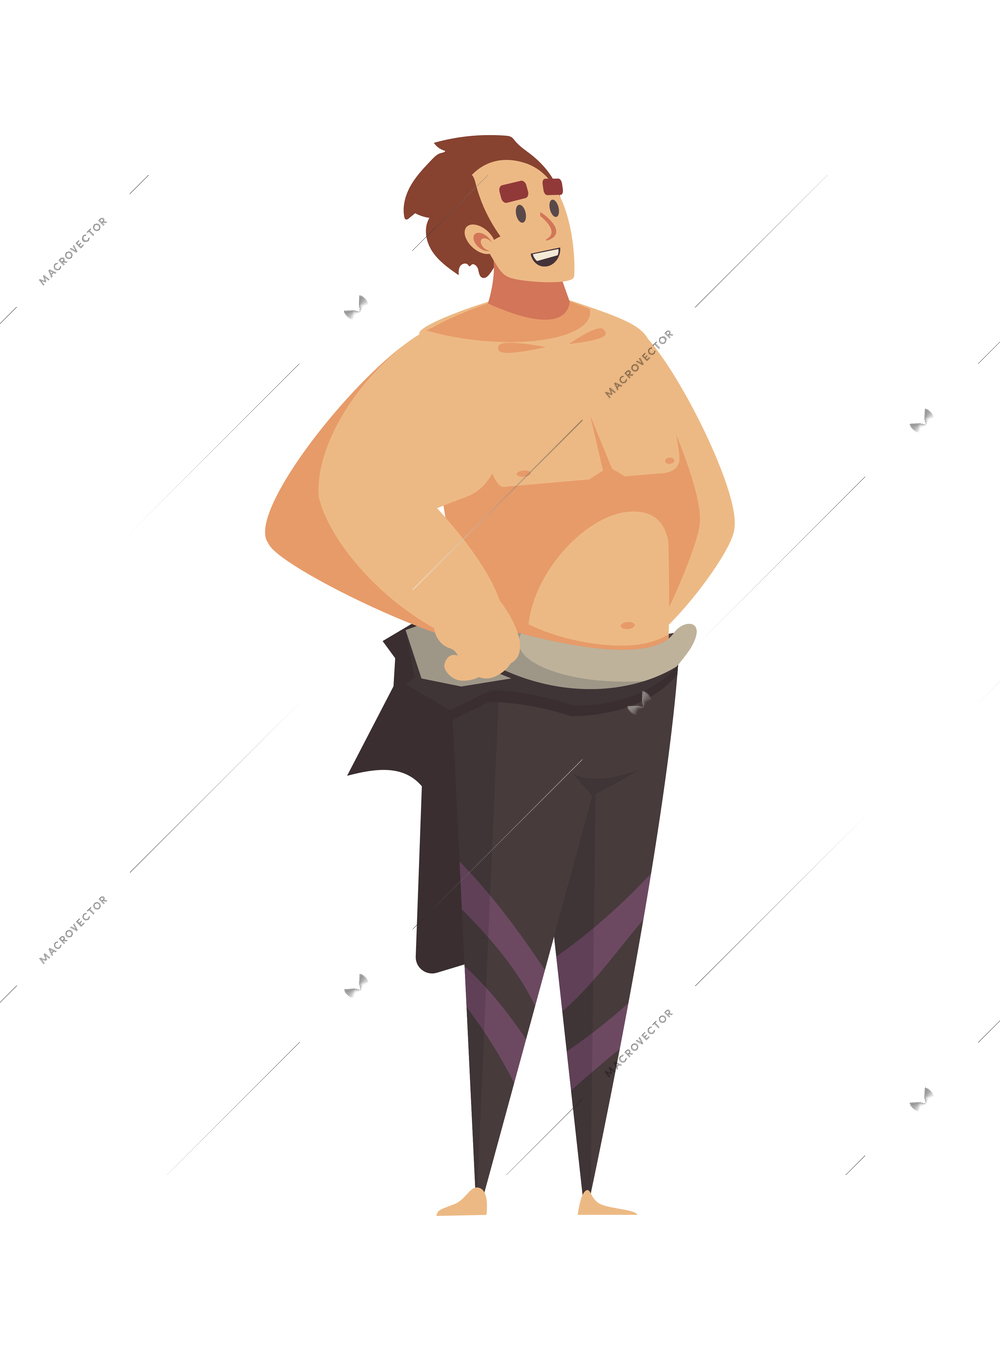 Scuba diving composition with isolated male character of diver getting dressed in floating suit vector illustration